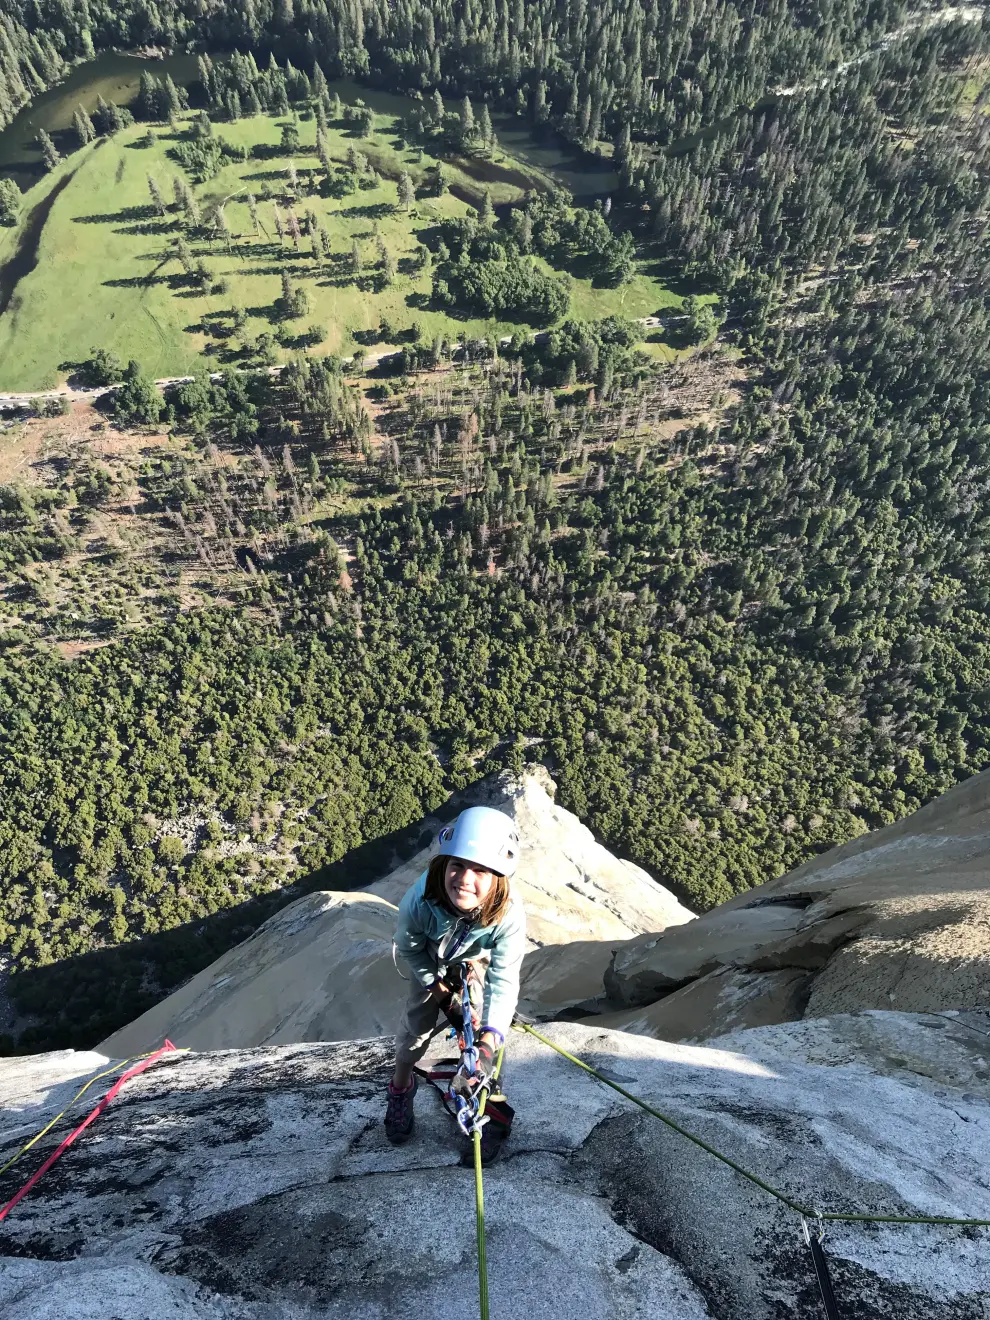 REFILE - CORRECTING TYPO Selah Schneiter, 10, of Colorado, climbs 'The Nose' route on El Capitan, in Yosemite Park, California, U.S., June 8, 2019 in this photo obtained from social media. Schneiter Family via REUTERS ATTENTION EDITORS - THIS IMAGE HAS BEEN SUPPLIED BY A THIRD PARTY. MANDATORY CREDIT. NO RESALES. NO ARCHIVES [[[REUTERS VOCENTO]]]